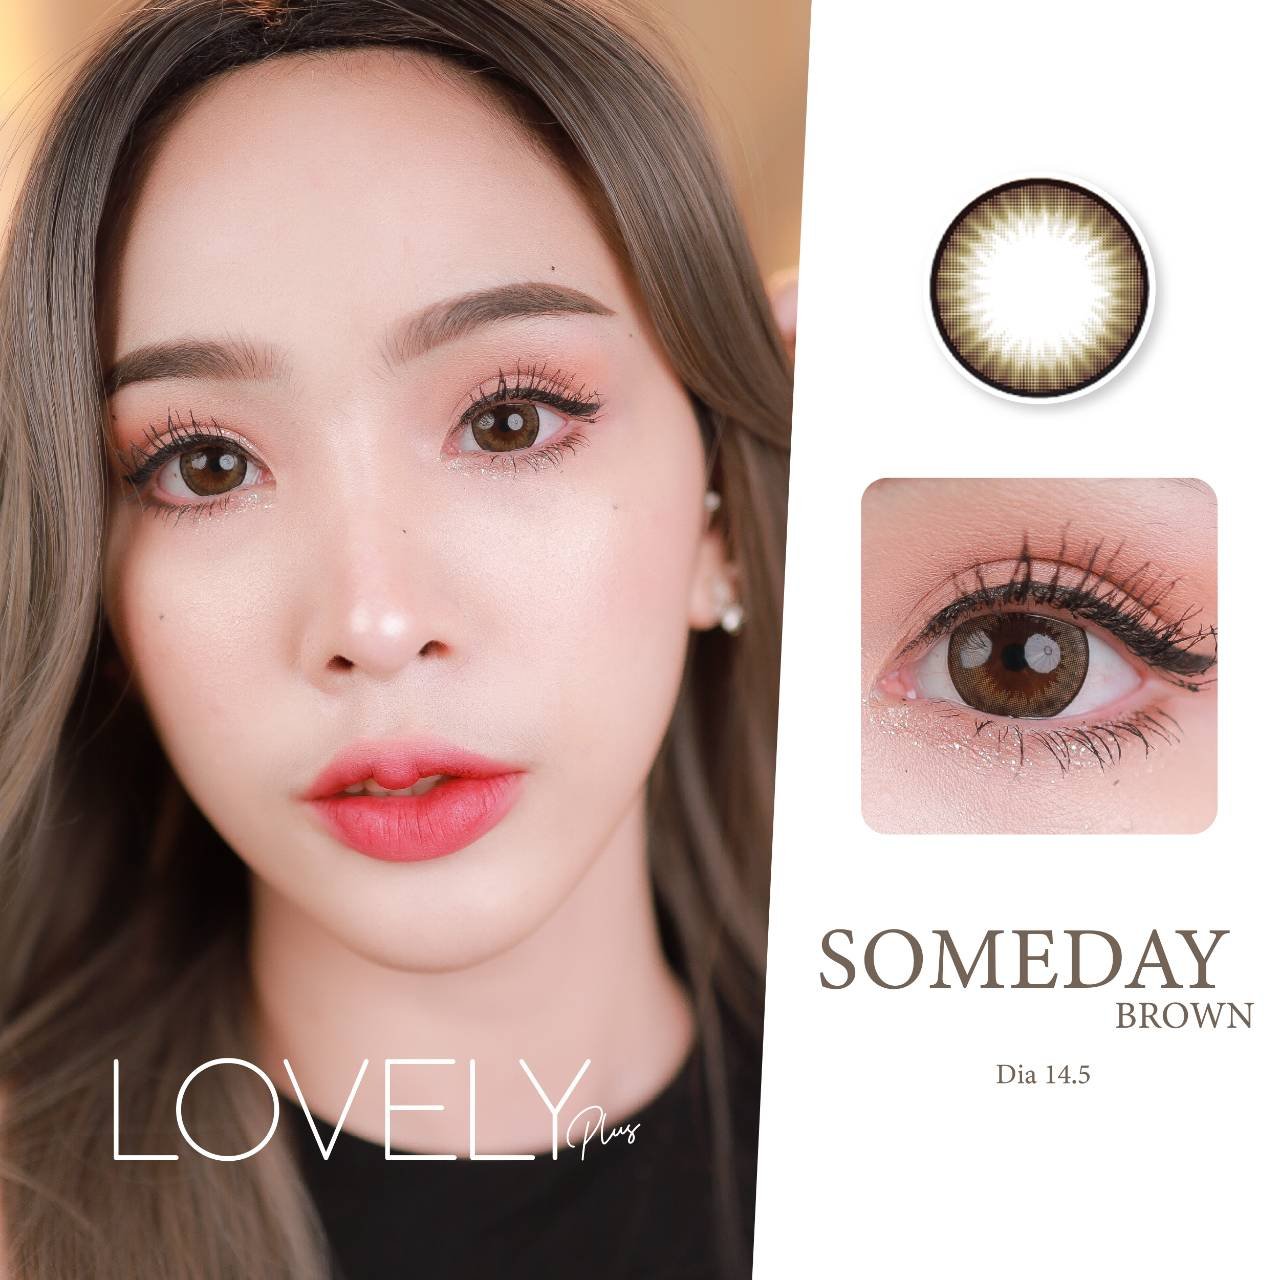 Someday brown